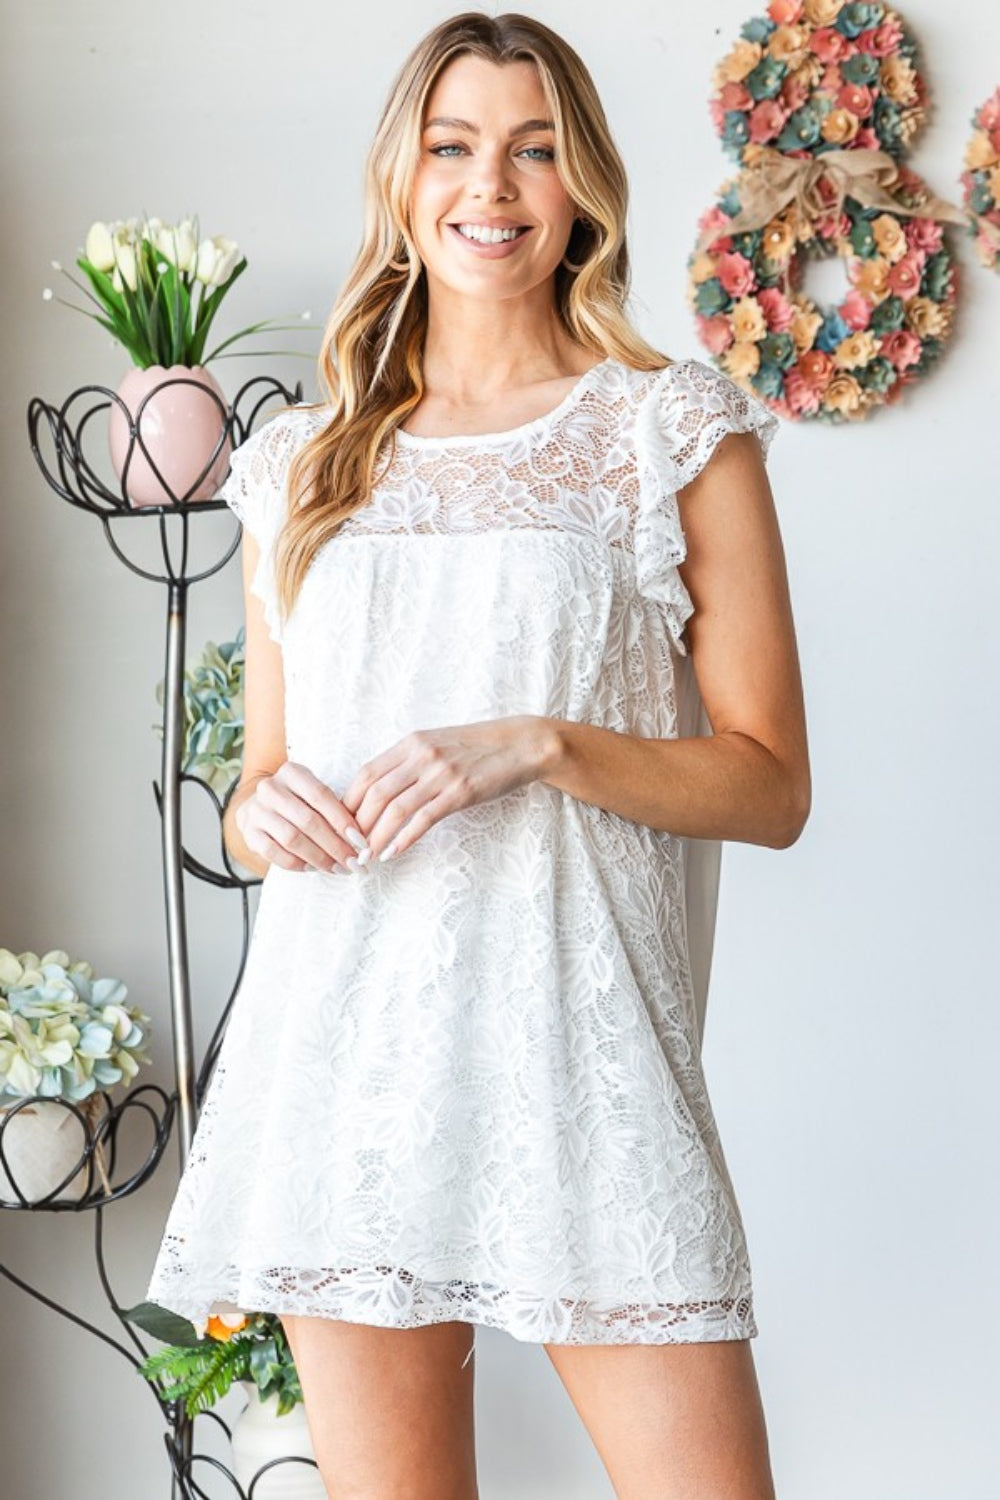 This round neck cap sleeve lace top is elegant and feminine, perfect for any occasion. The delicate lace detailing adds a touch of sophistication, while the cap sleeves provide a flattering and comfortable fit.  S - 3X